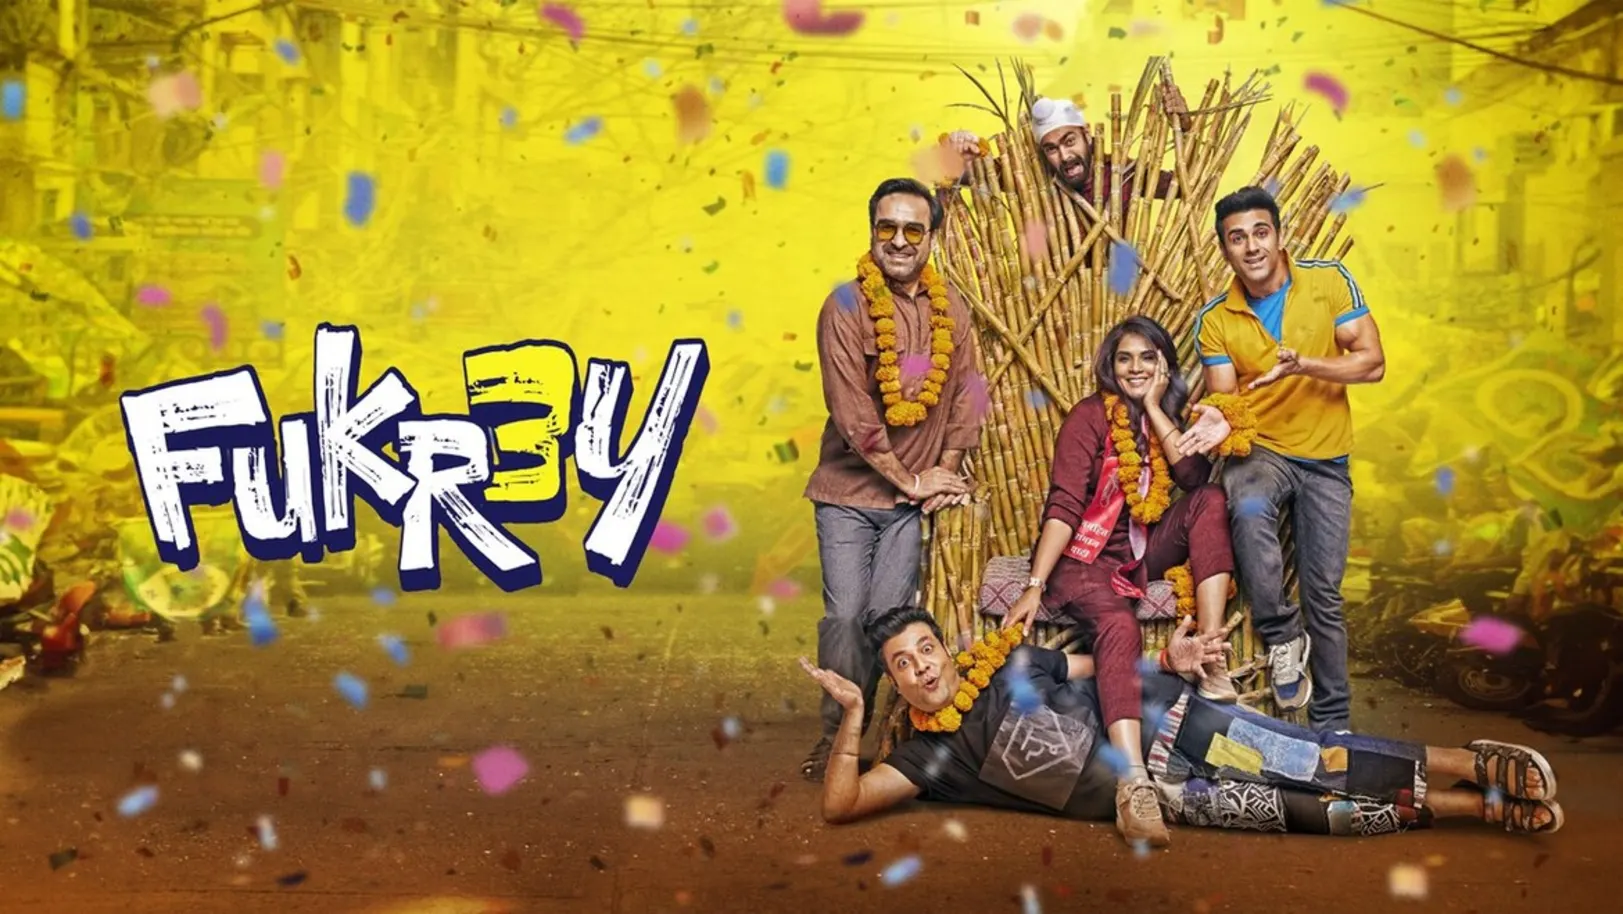 Fukrey 3 Streaming Now On &Pictures